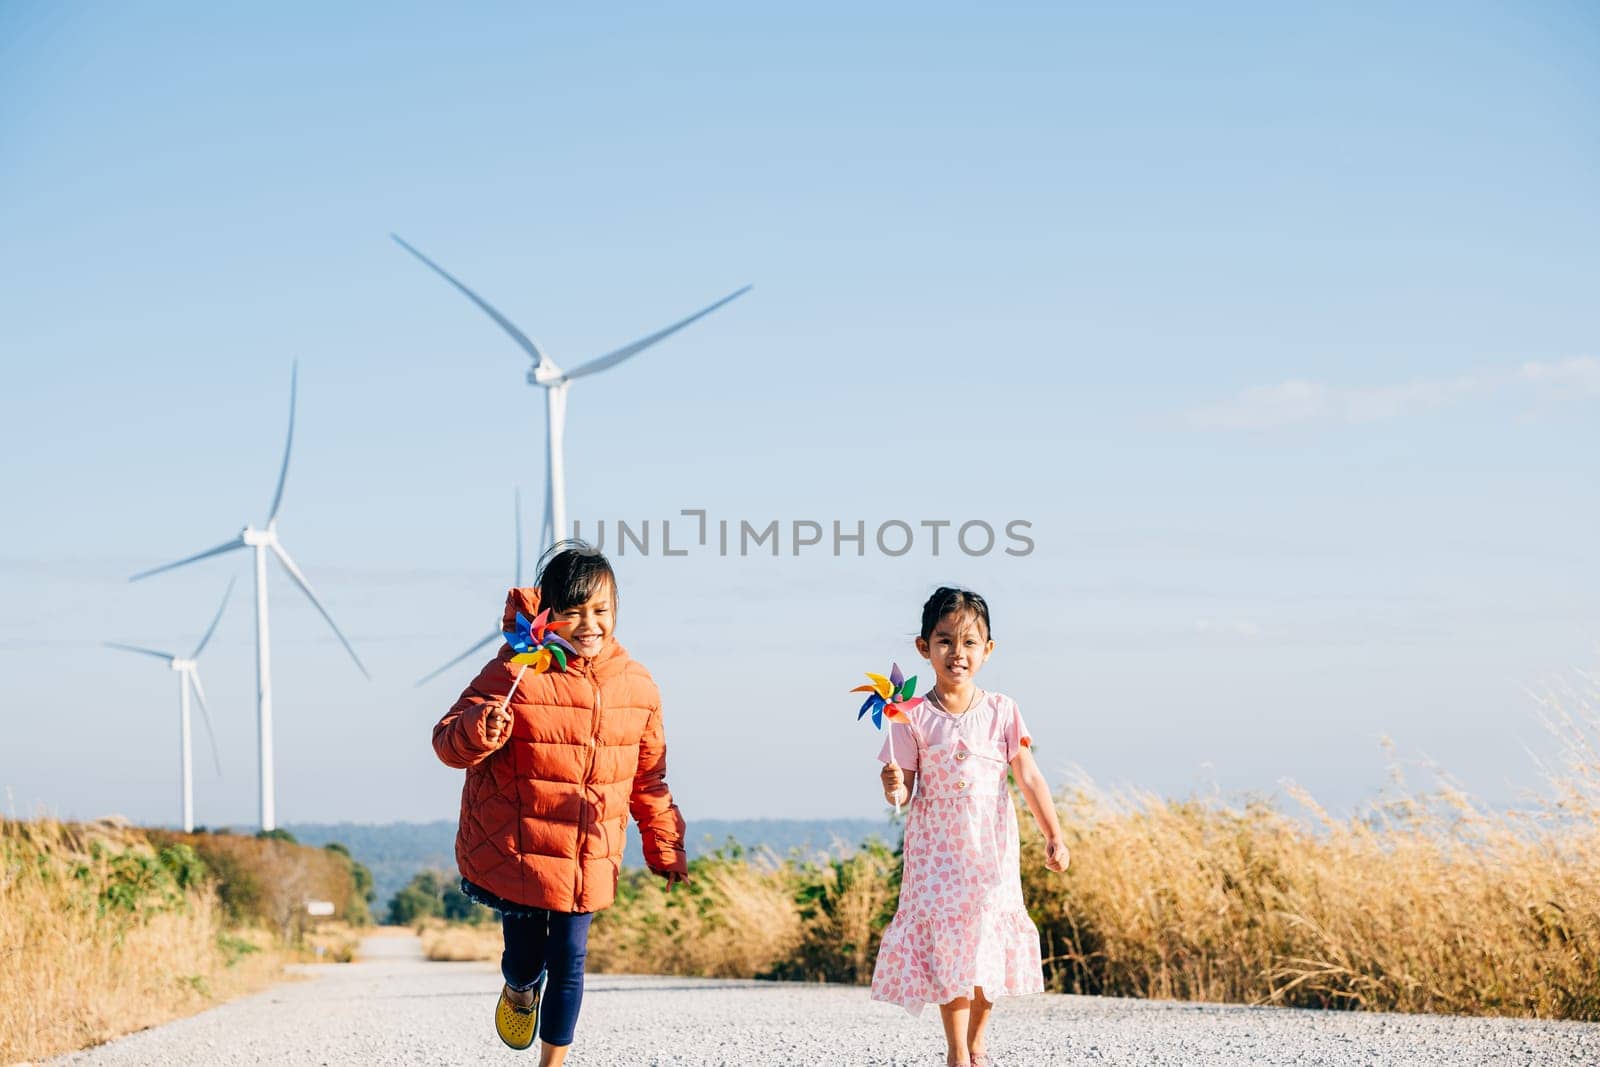 Two children girl with pinwheel playfully run by windmills by Sorapop